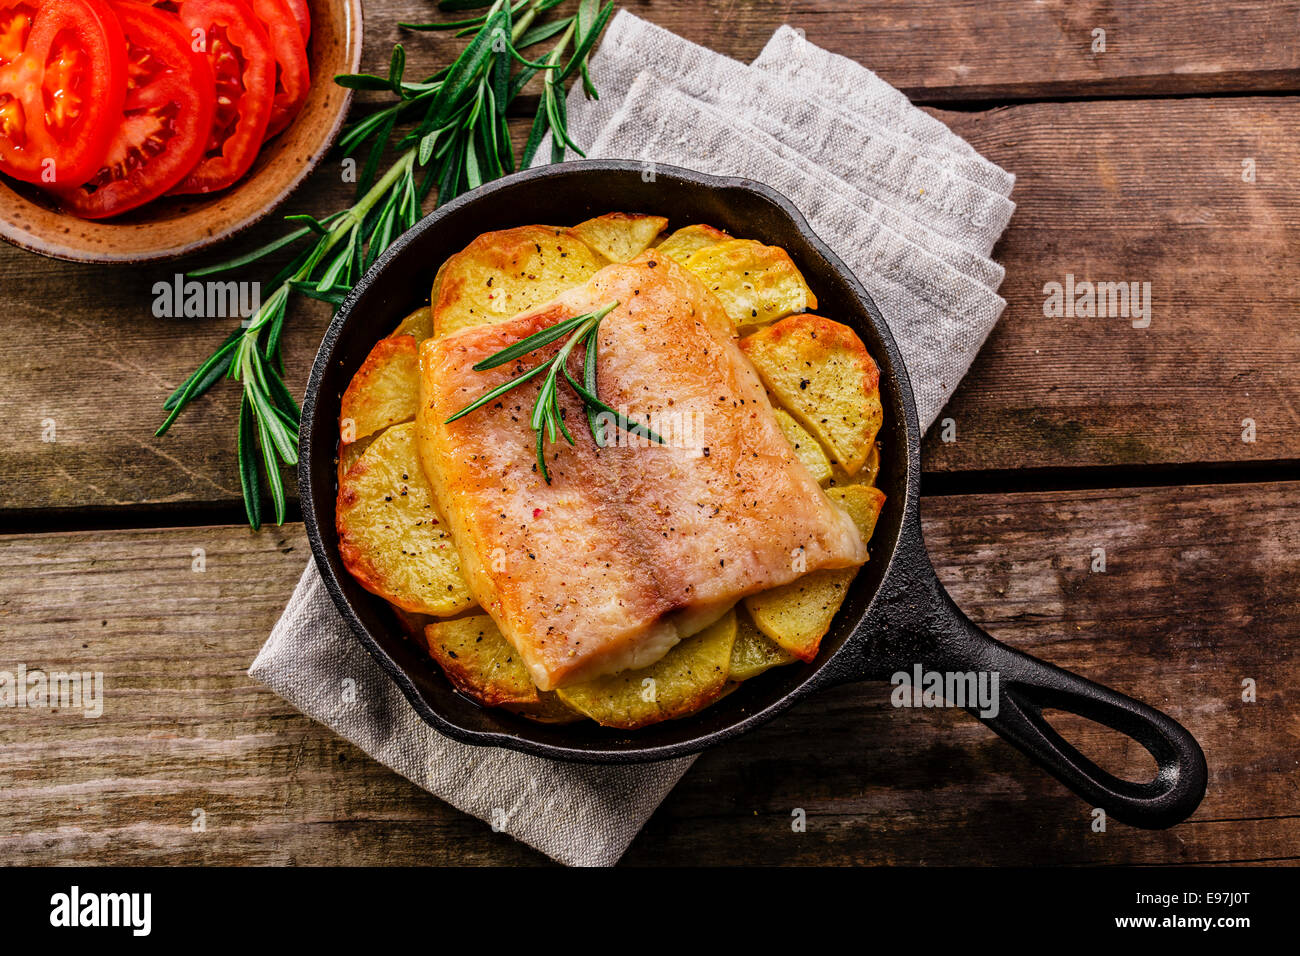 Baked fish fillets with potatoes in a frying pan Stock Photo